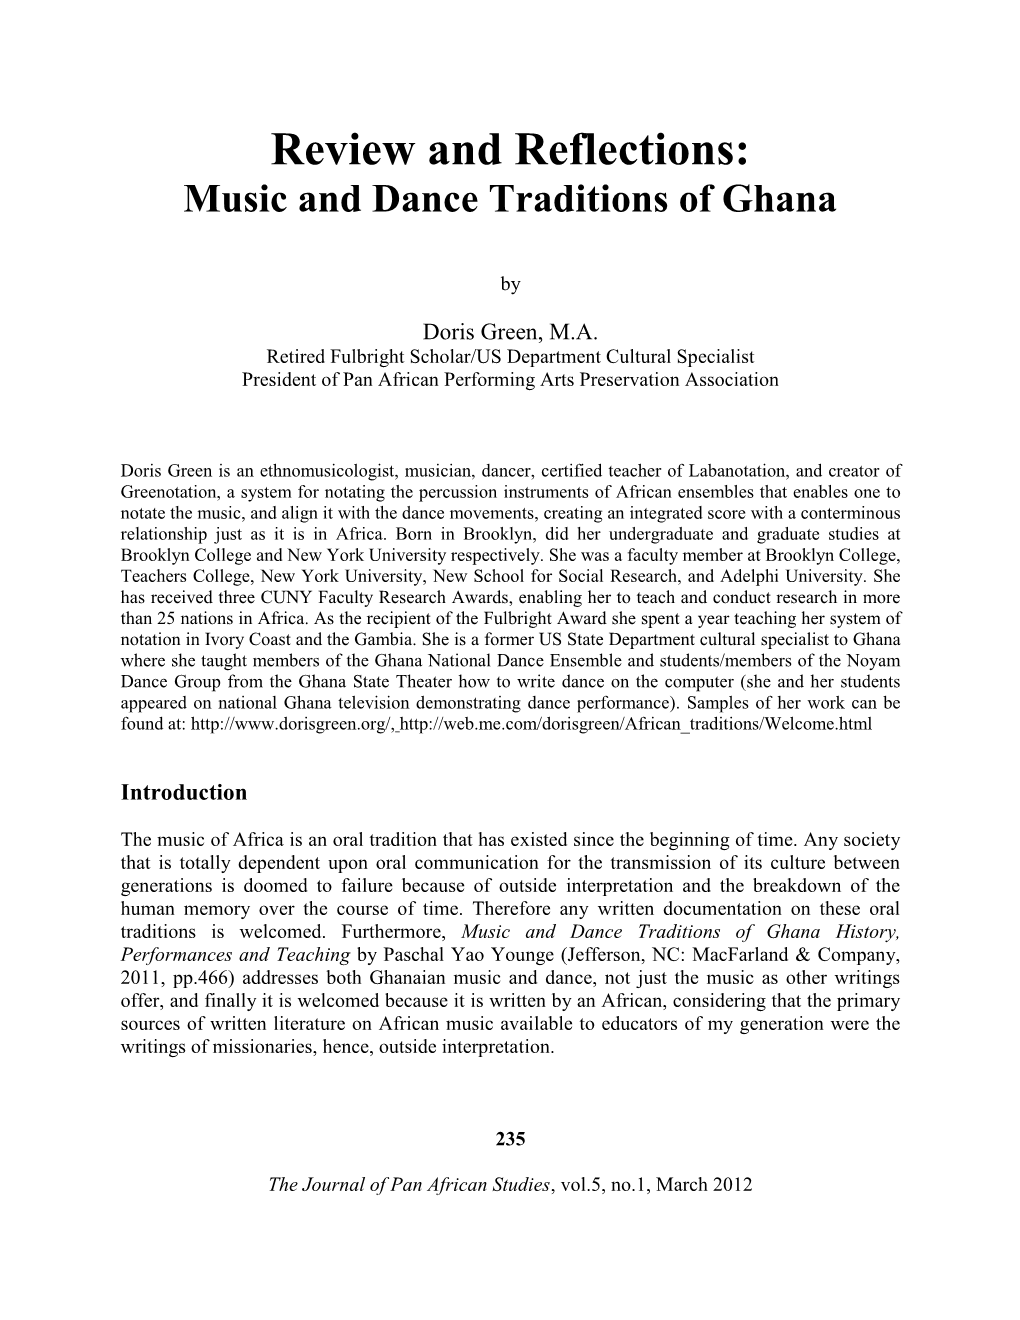 Review and Reflections:Music and Dance Traditions of Ghana